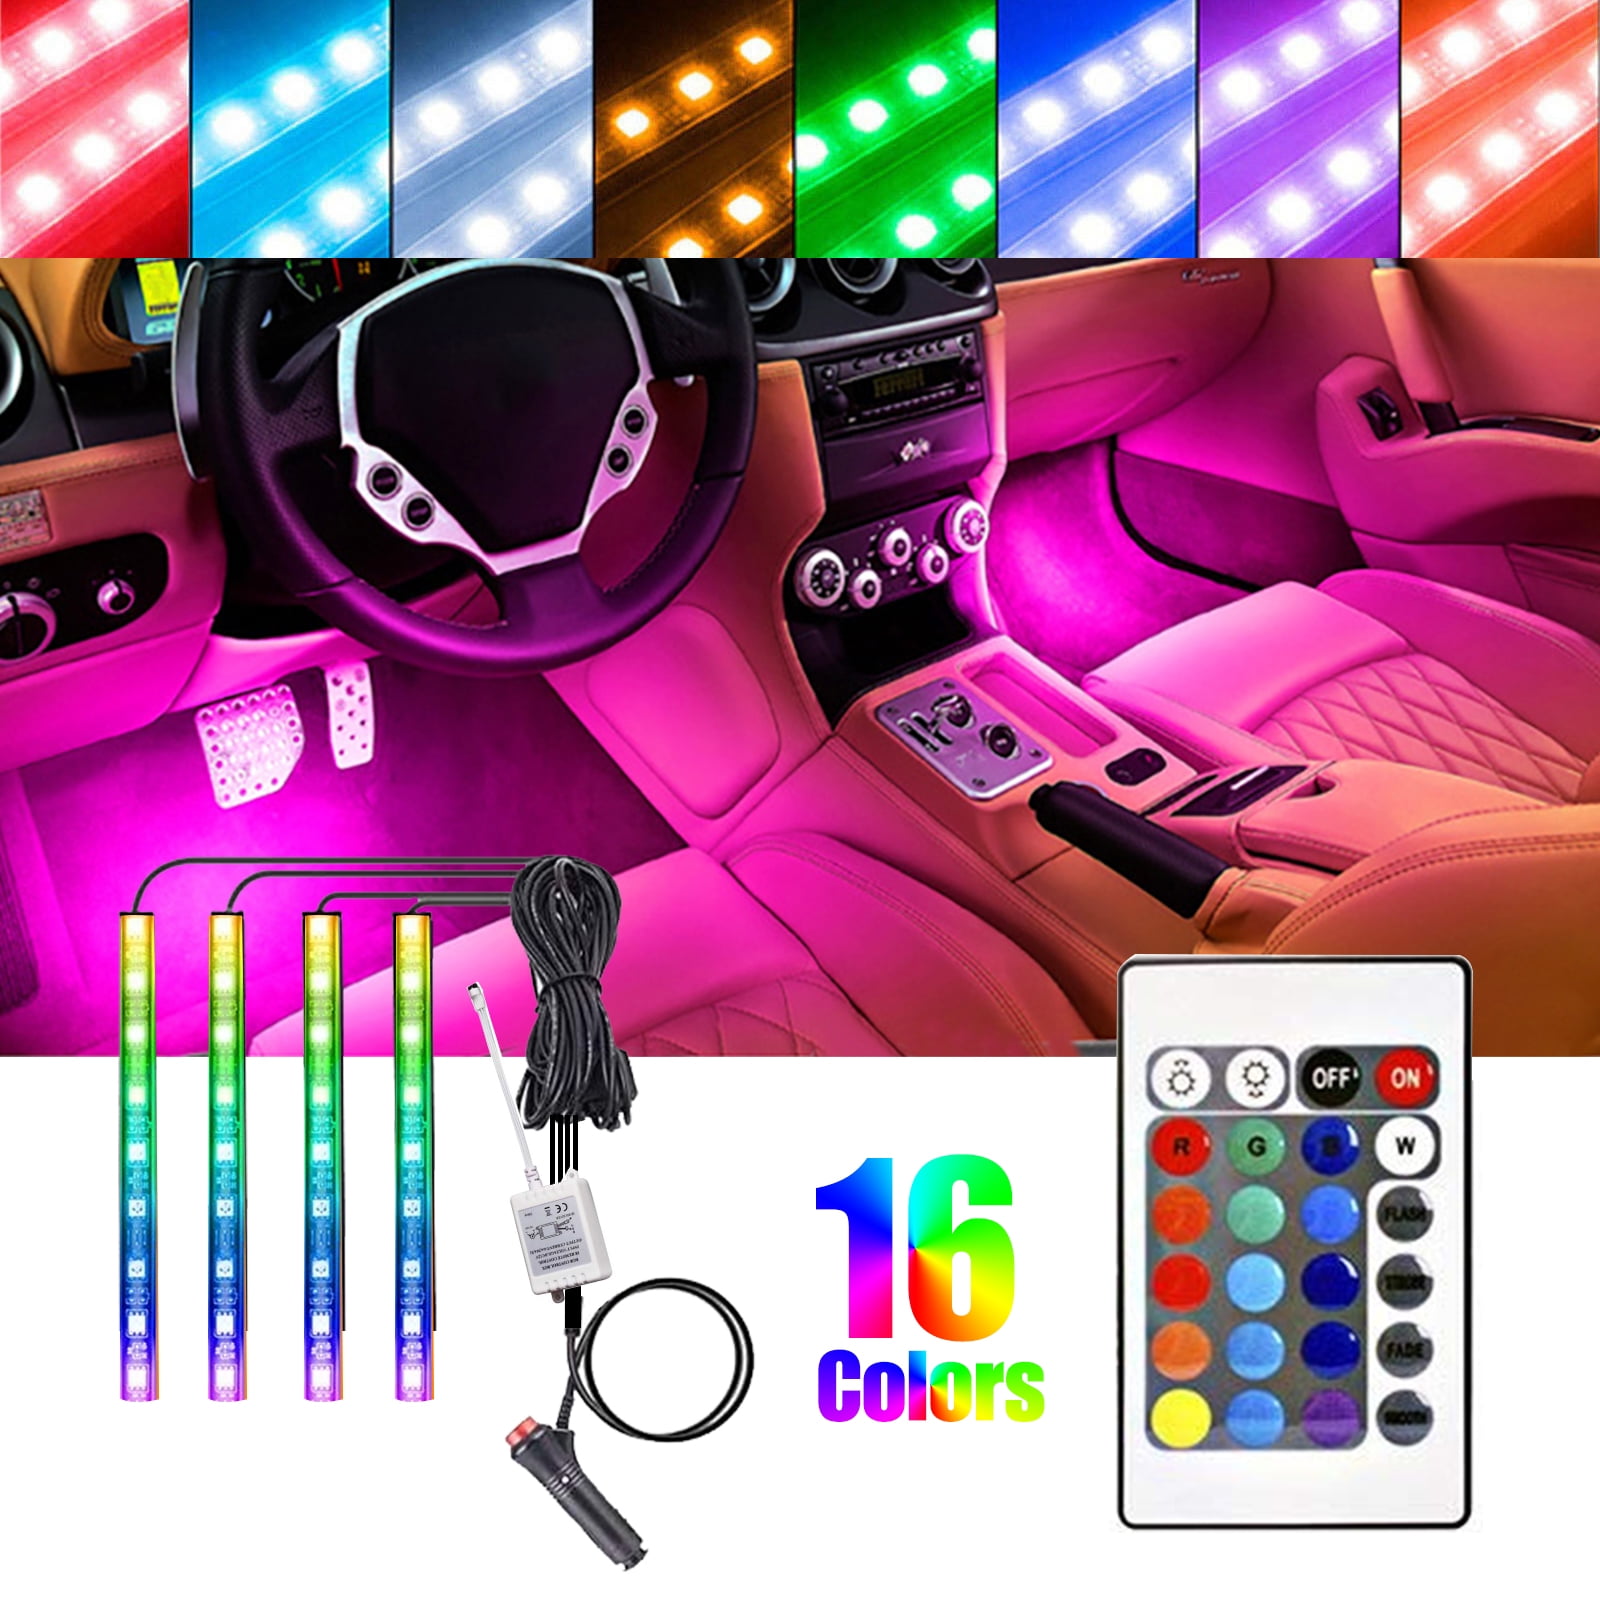 36 LEDs Motorcycle Accent Light Kit Multi-Color Expandable 4 Strips w/Remote